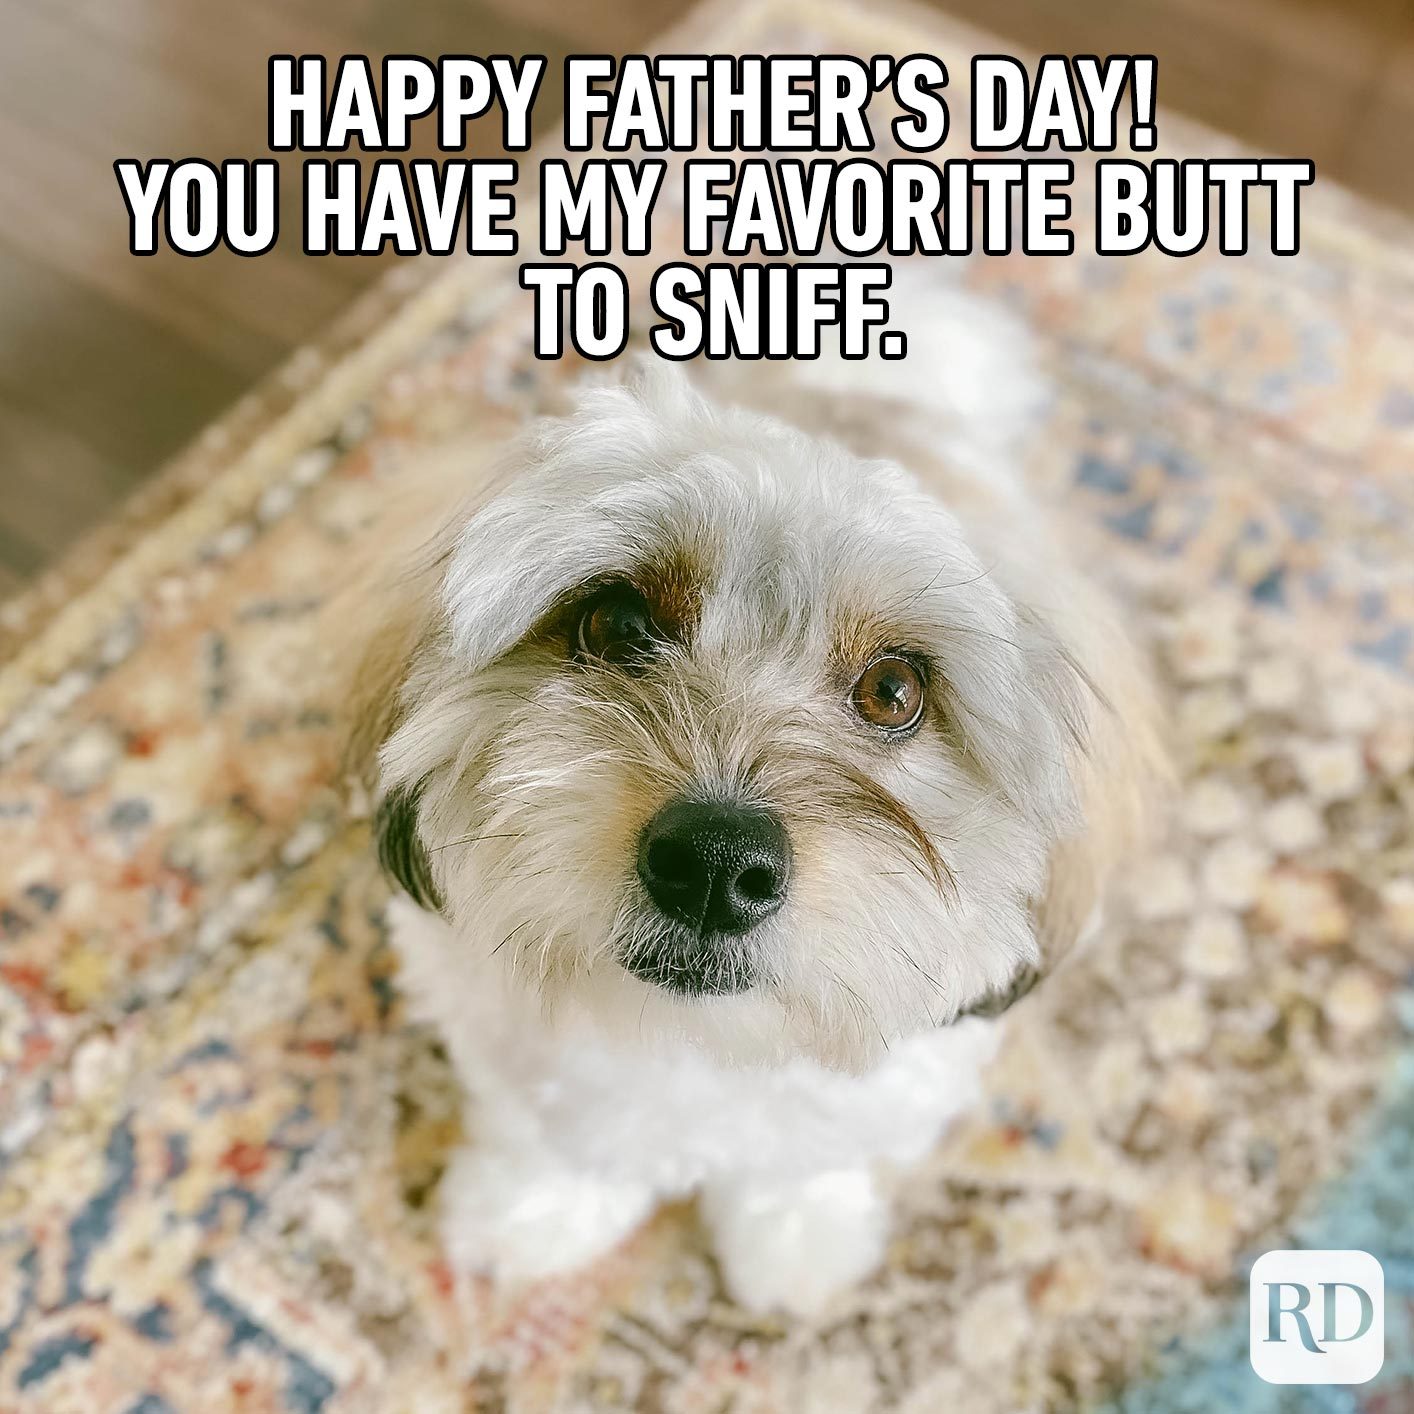 18 Funny Images For Happy Fathers Day Memes 2020 - Photos